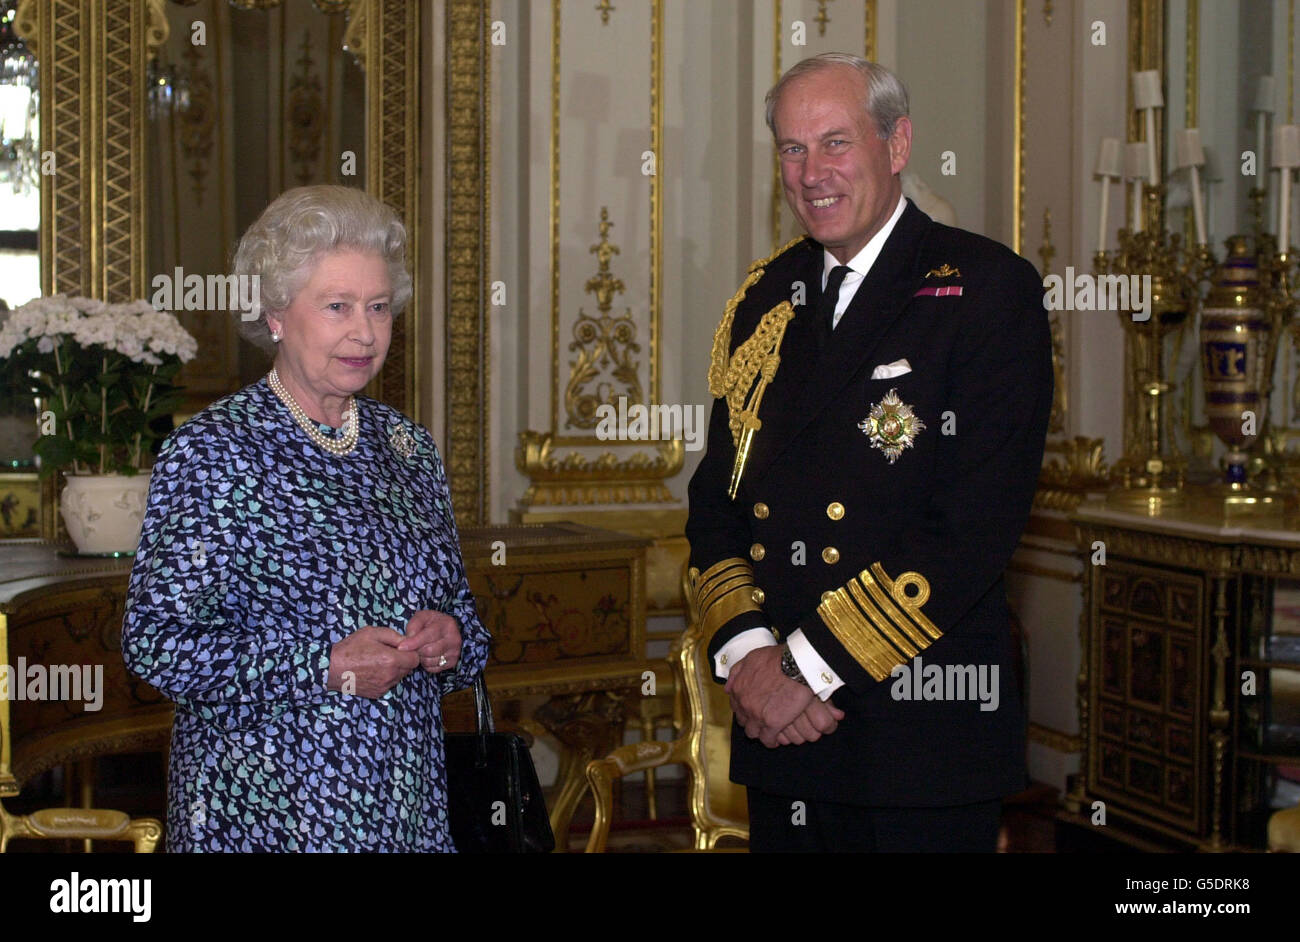 Britain's Queen Elizabeth II receiving Admiral Sir Michael Boyce on assumng the appointment of the Chief of the Defence Staff, at Buckingham Palace, London. Stock Photo